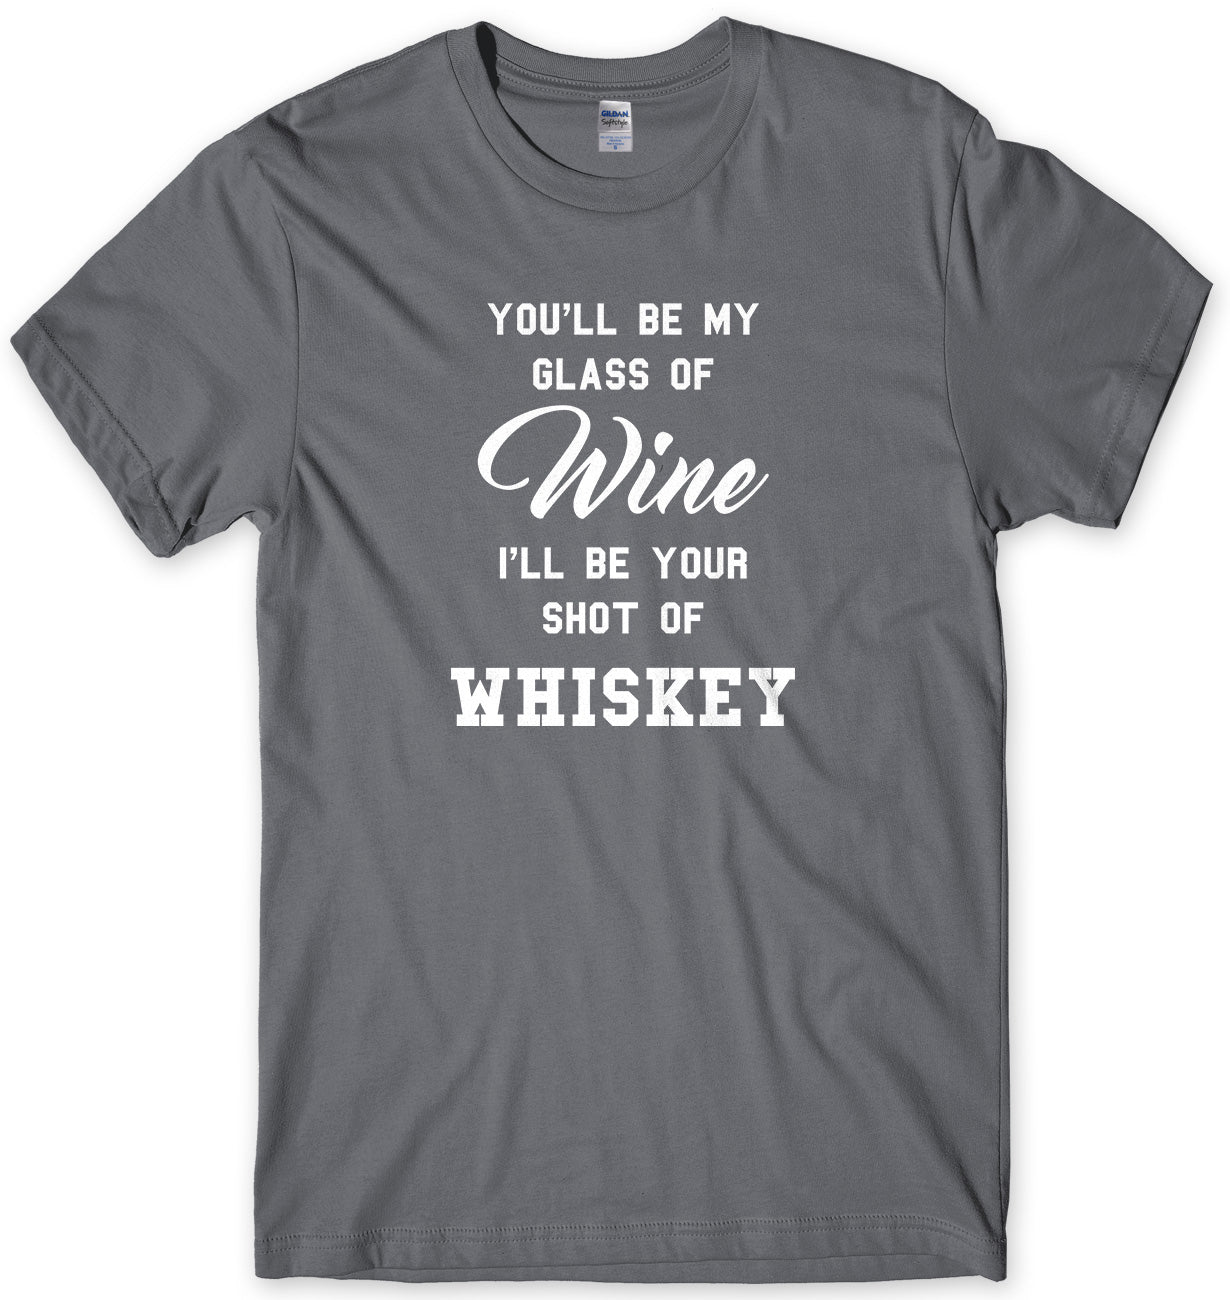 You'll Be My Glass Of Wine, I'll Be Your Shot Of Whiskey Mens Unisex Style T-Shirt